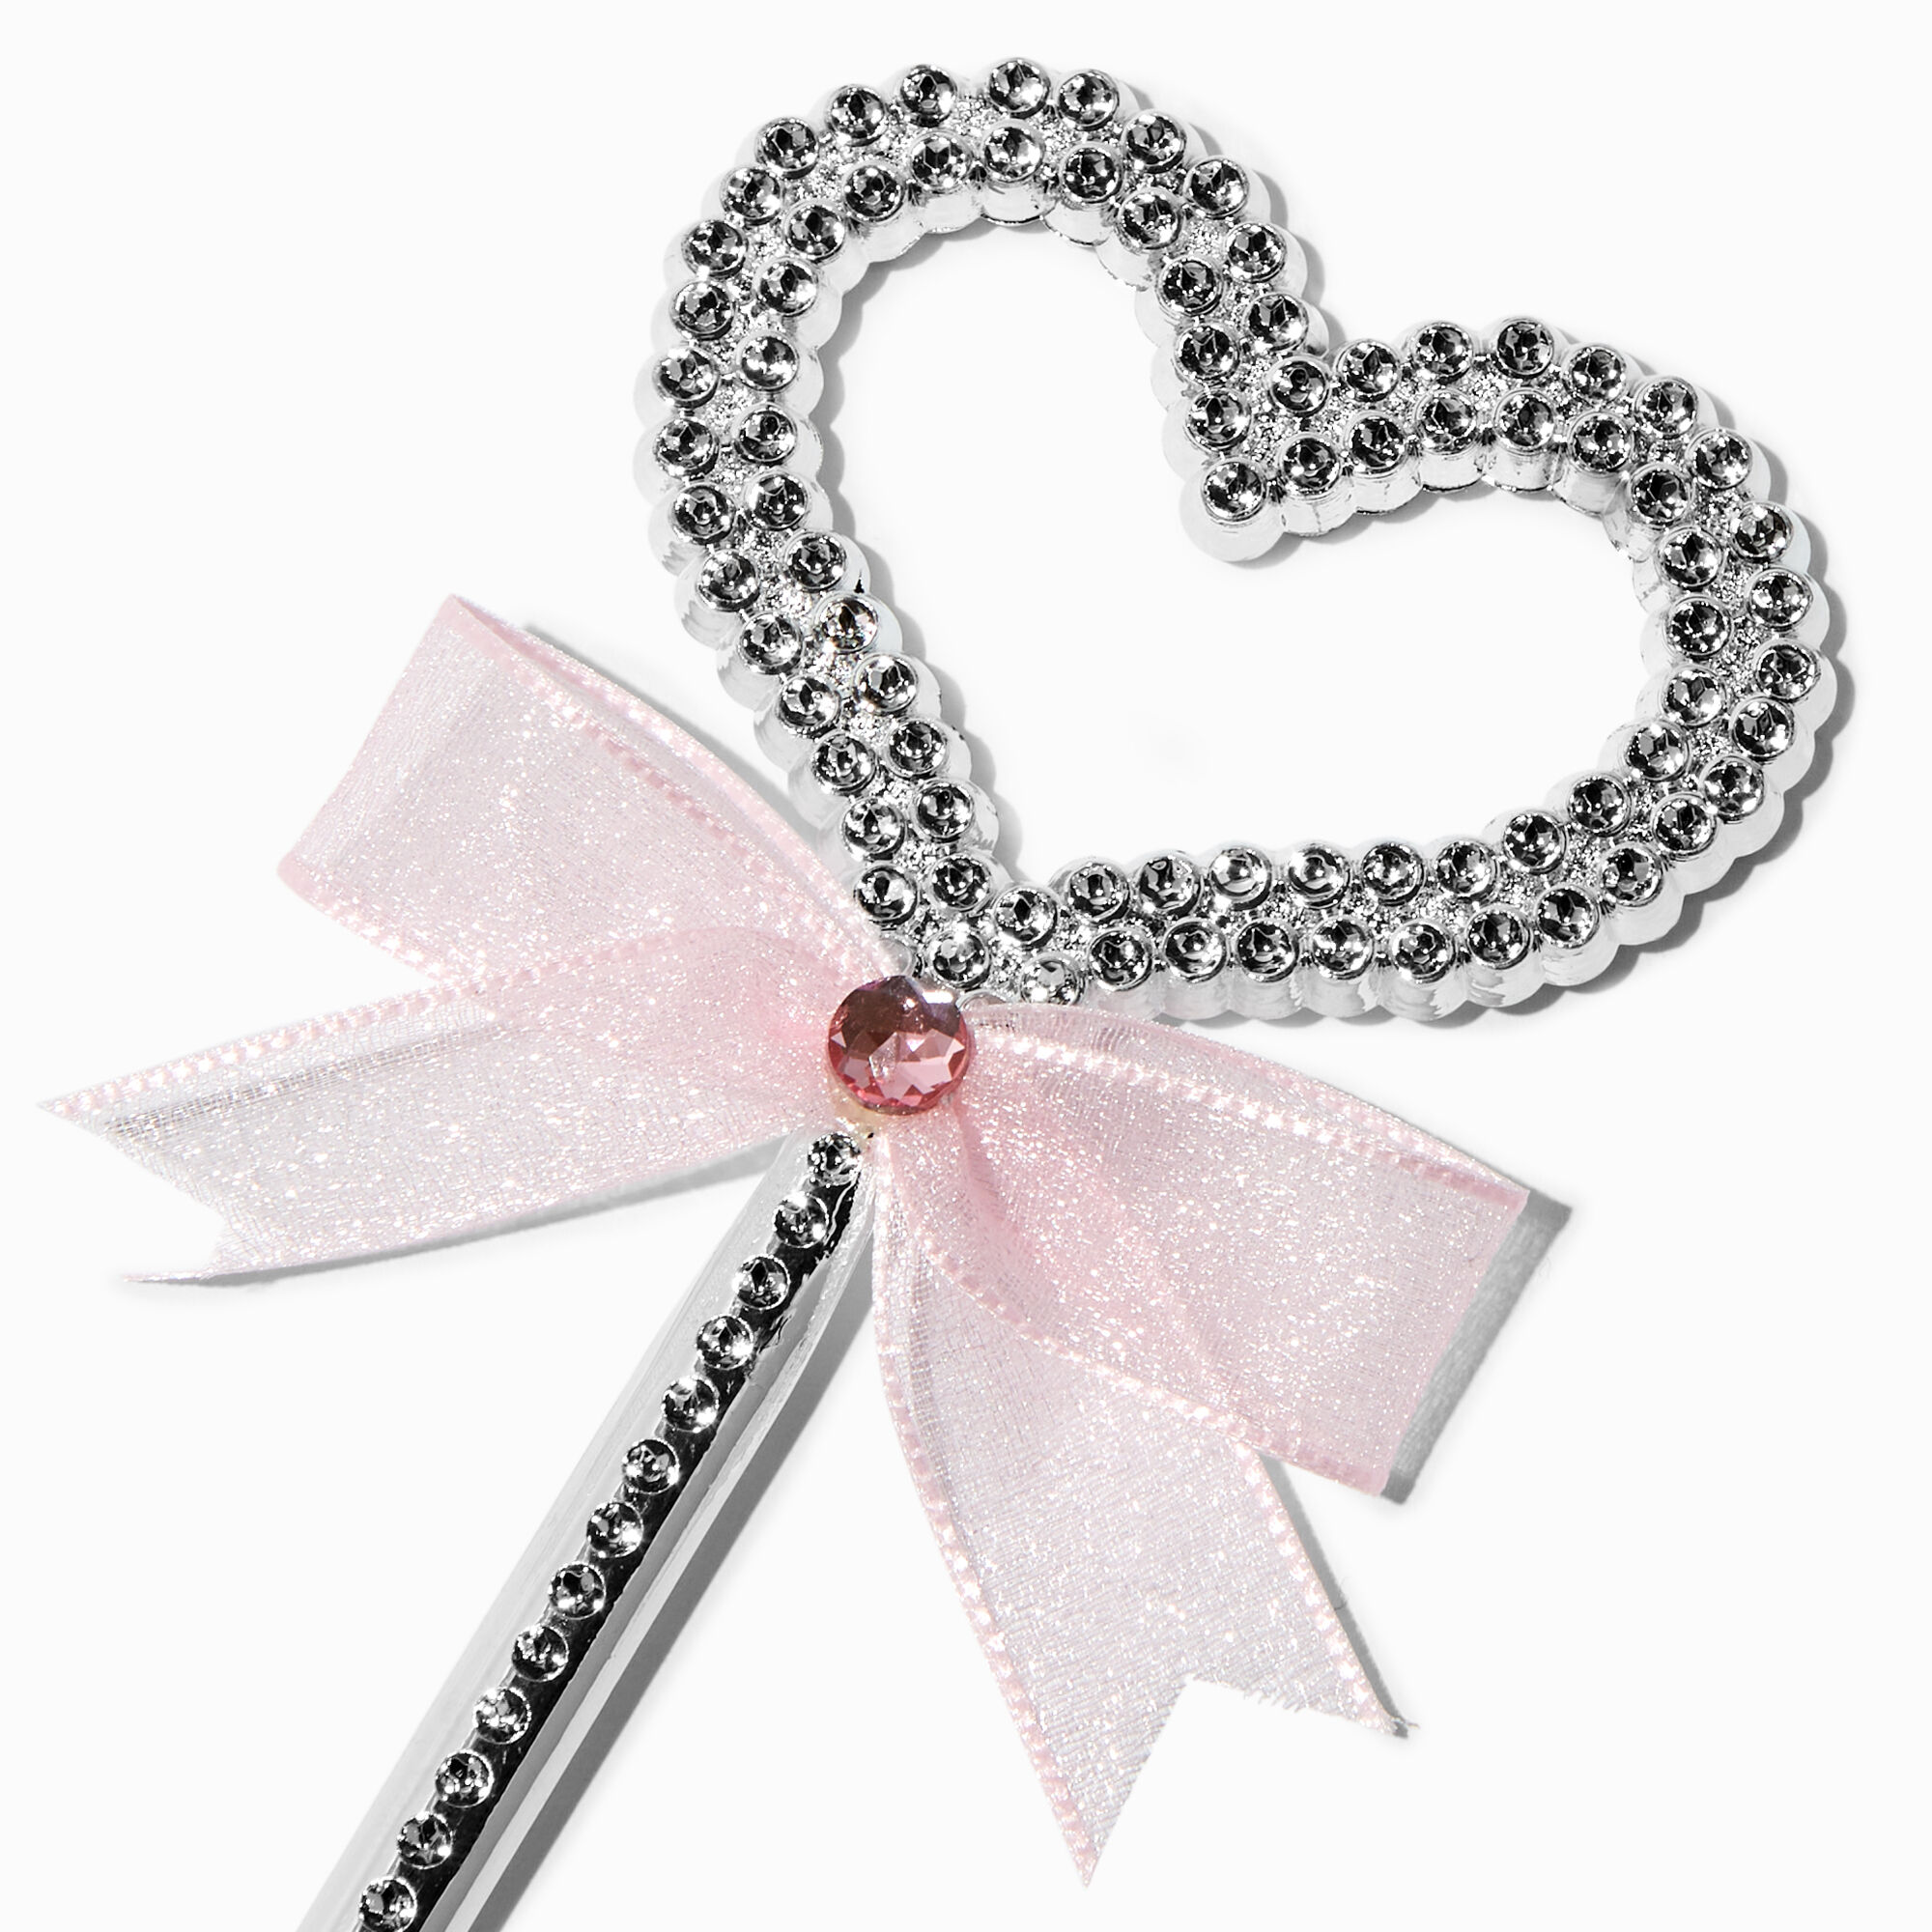 View Claires Club Bow Silver Heart Wand Pink information